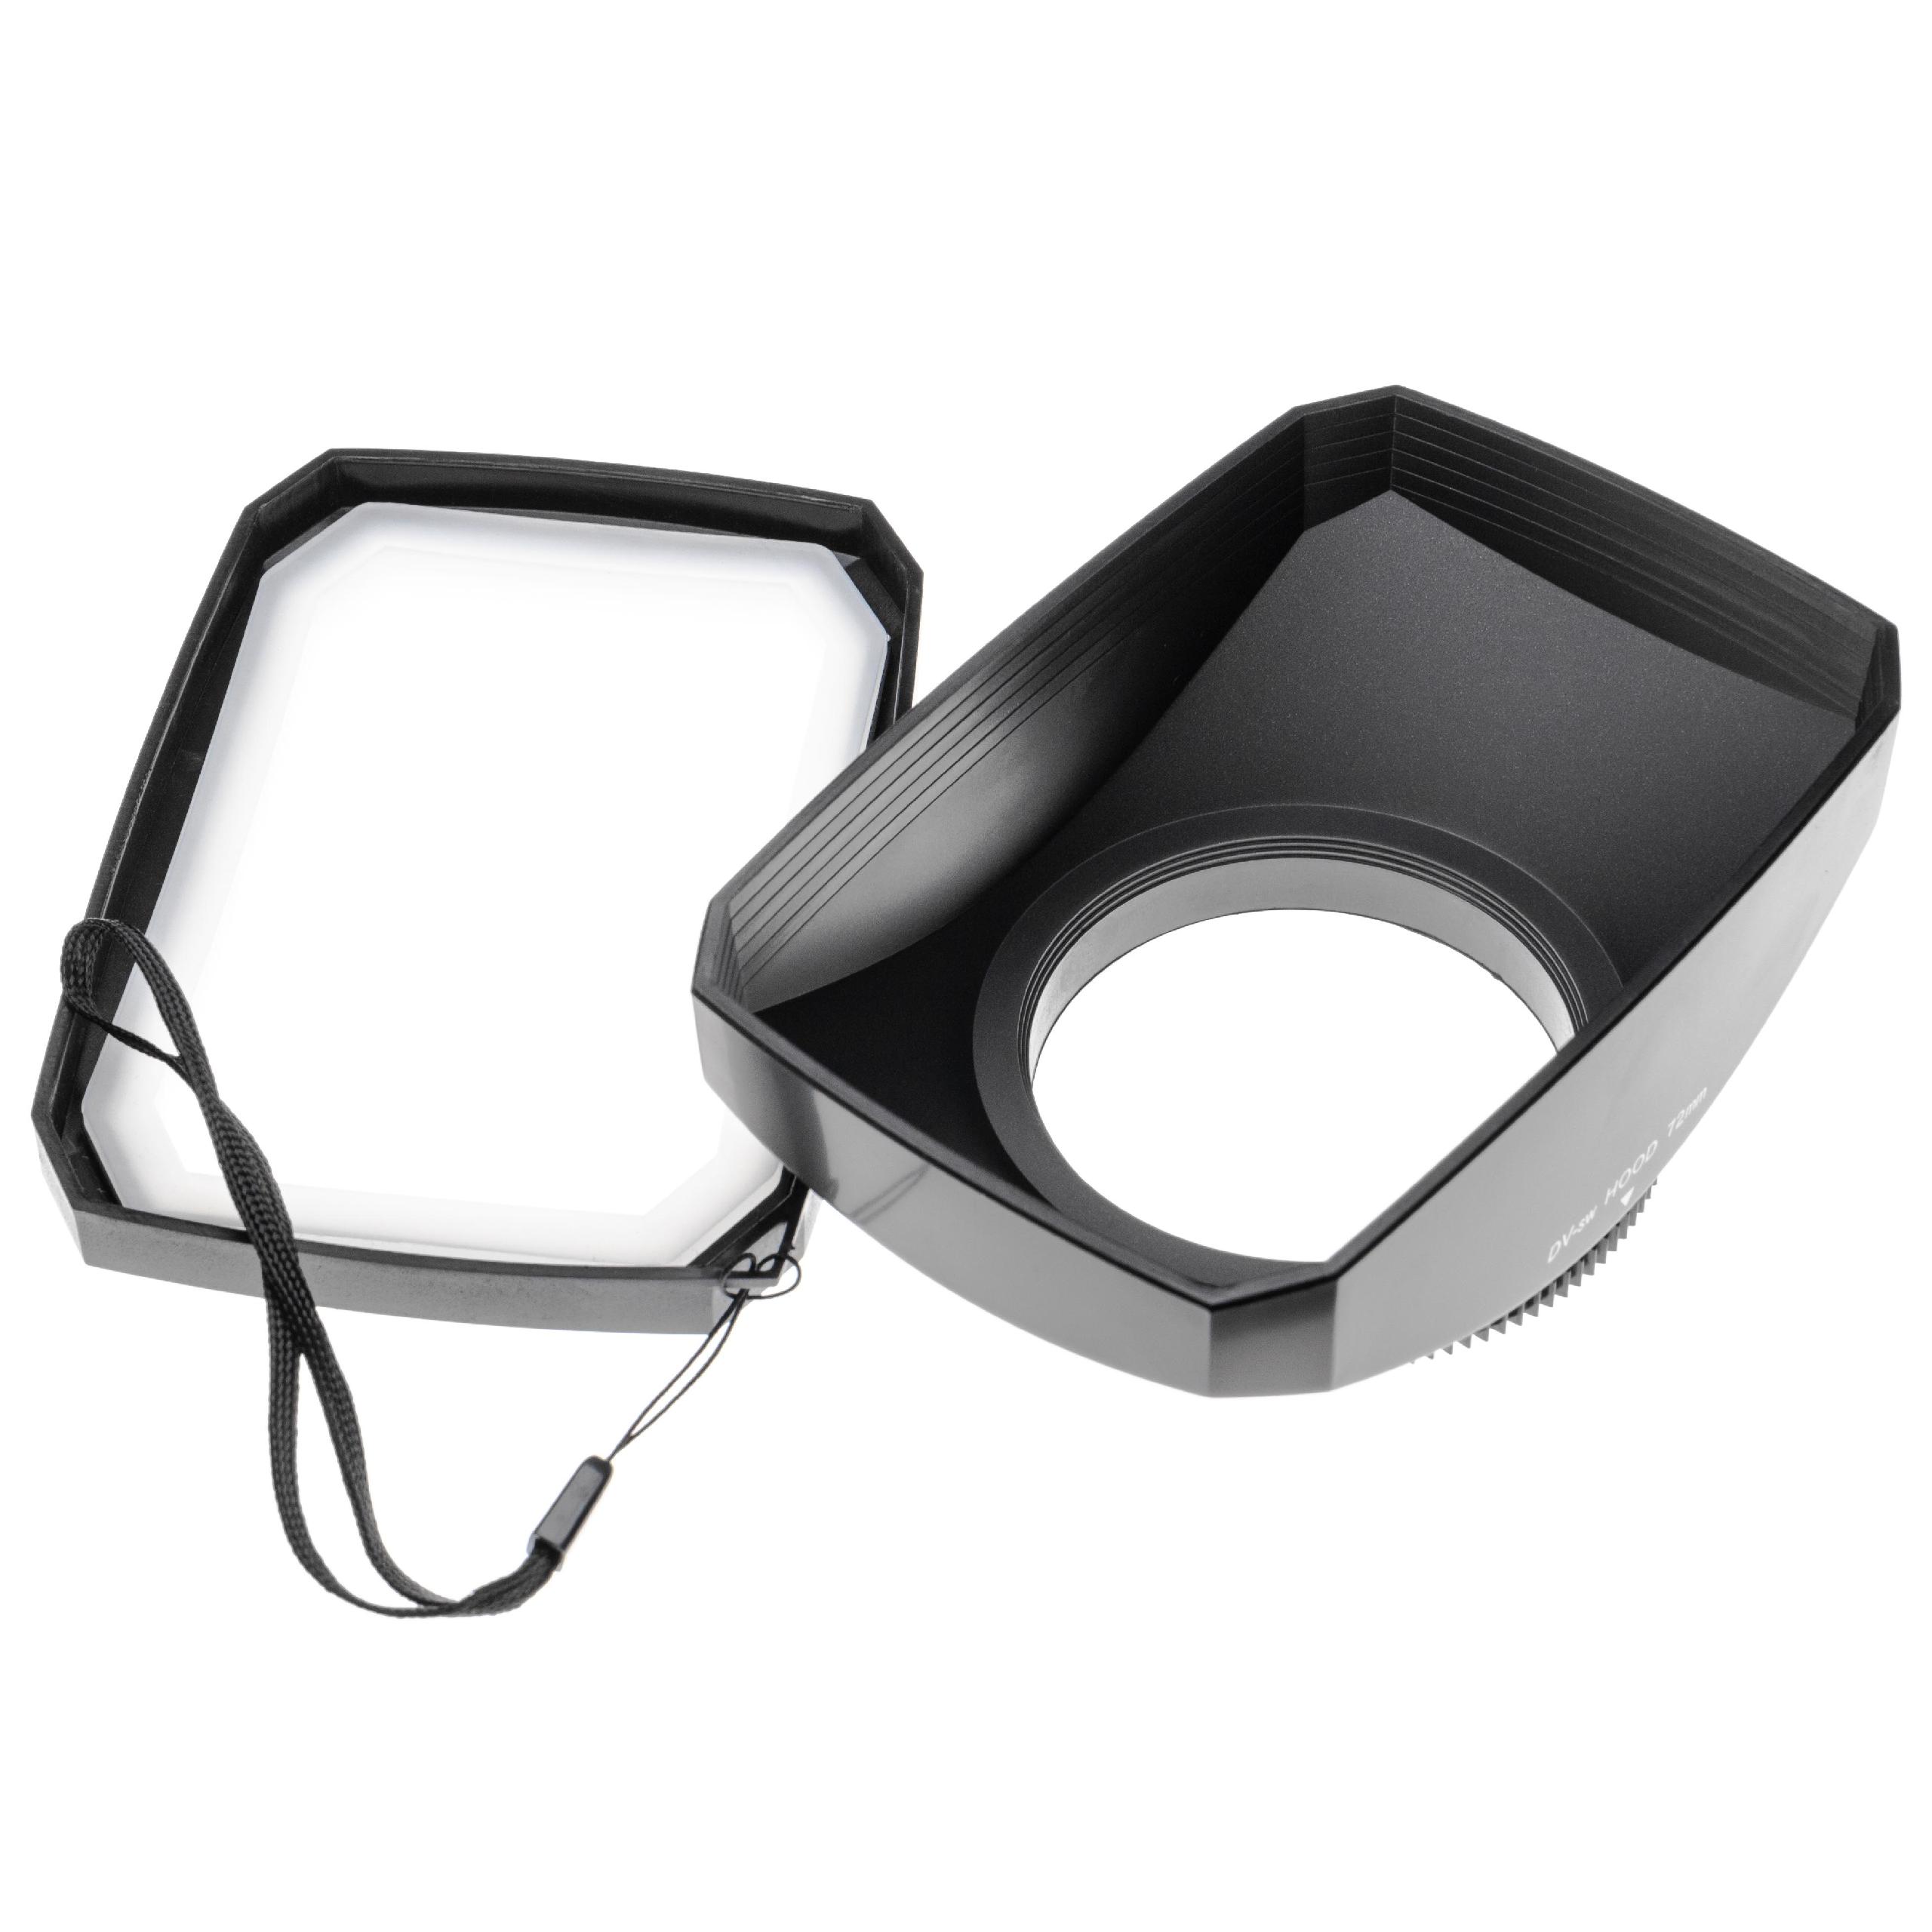 Lens Hood with White Balance Lens Cap for Cameras with 72 mm Filter Thread - 16:9 Format 